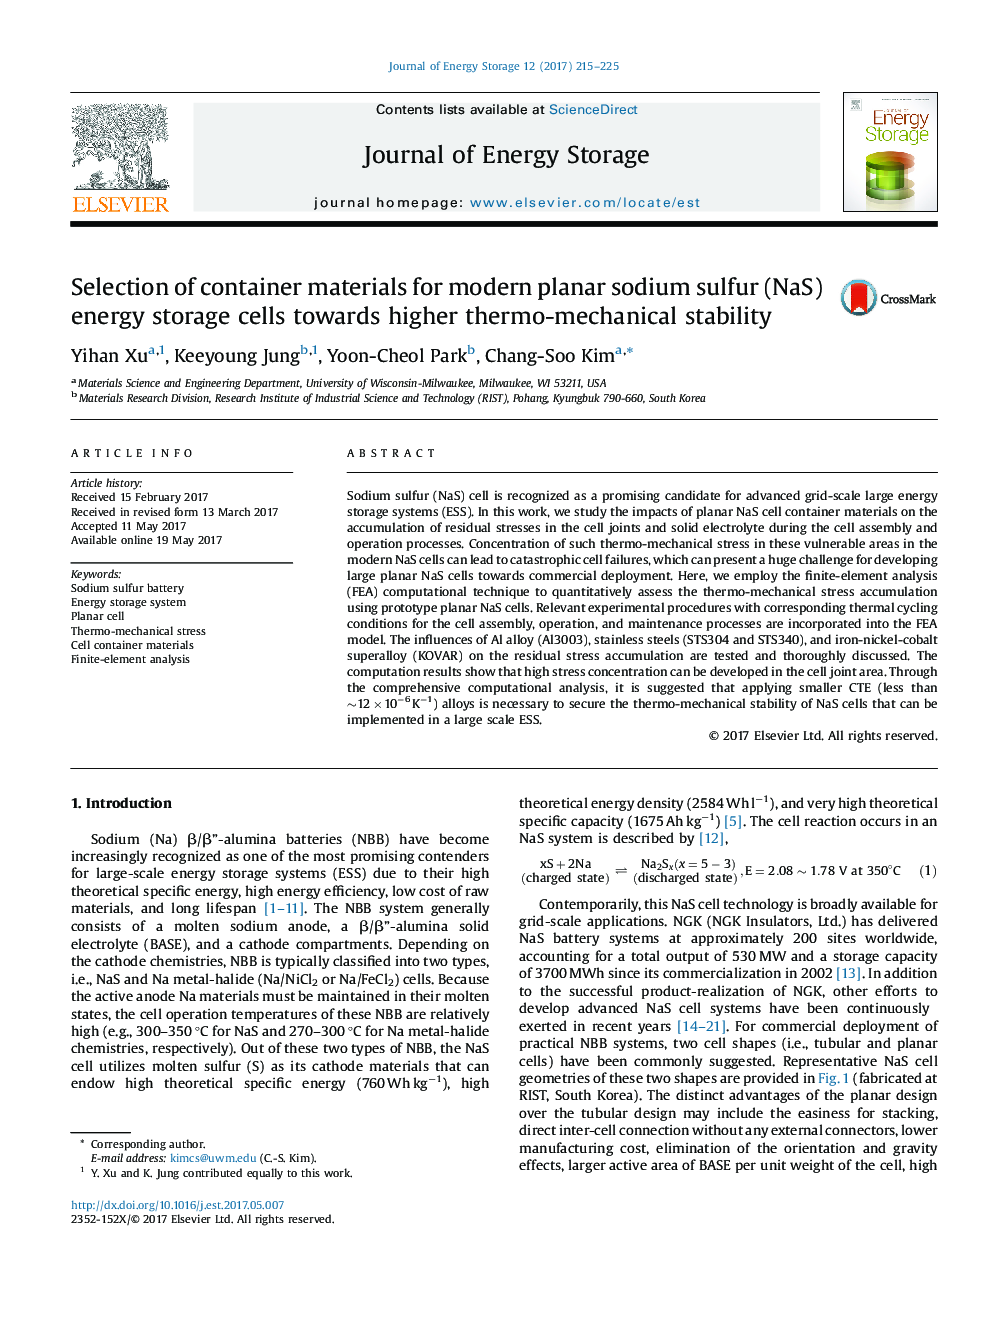 Selection of container materials for modern planar sodium sulfur (NaS) energy storage cells towards higher thermo-mechanical stability